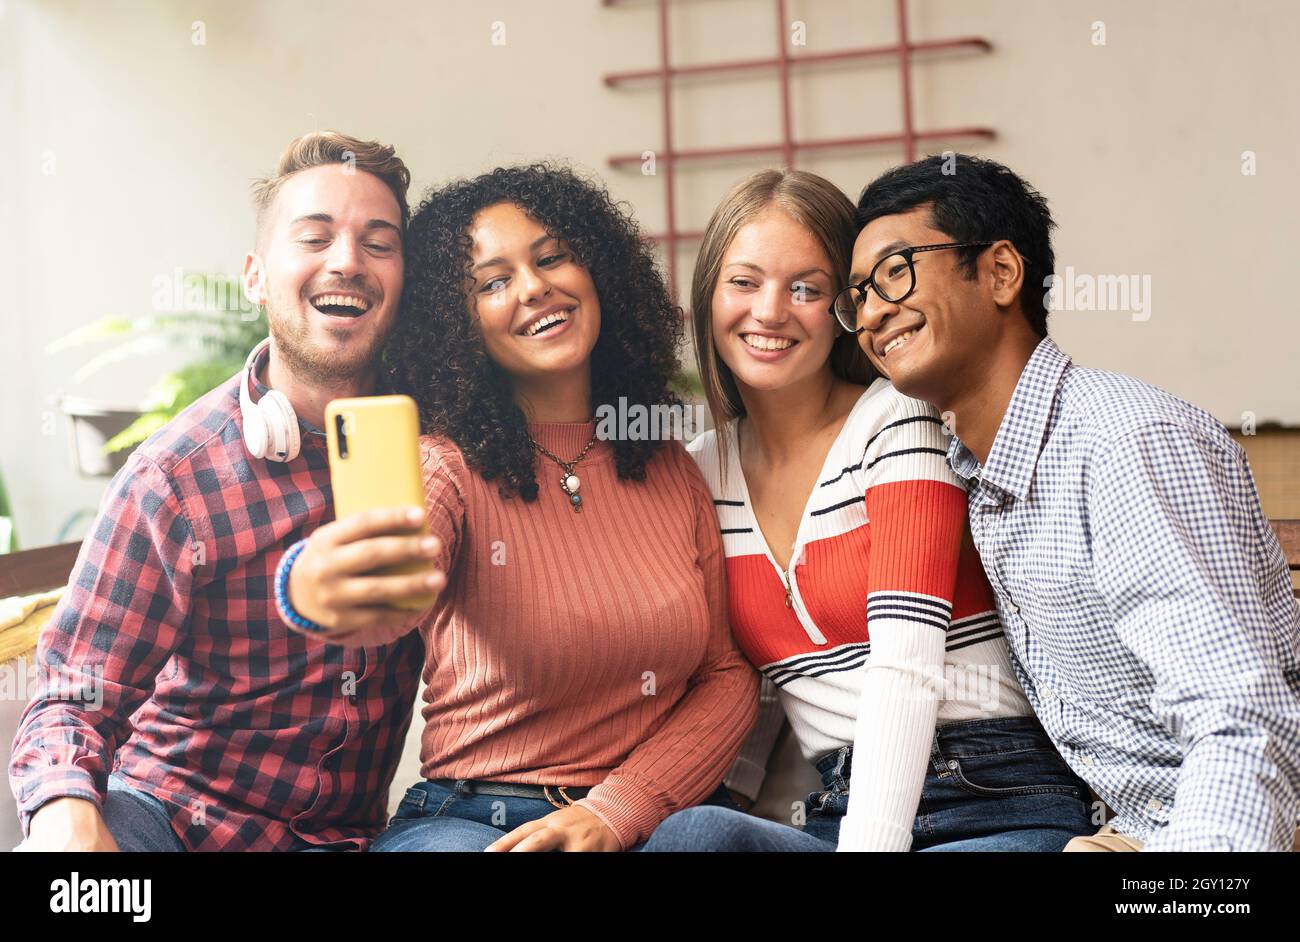 Young friends group making selfie with smartphone - Community concept with multicultural and multiethnic friends having fun video calling with friends Stock Photo